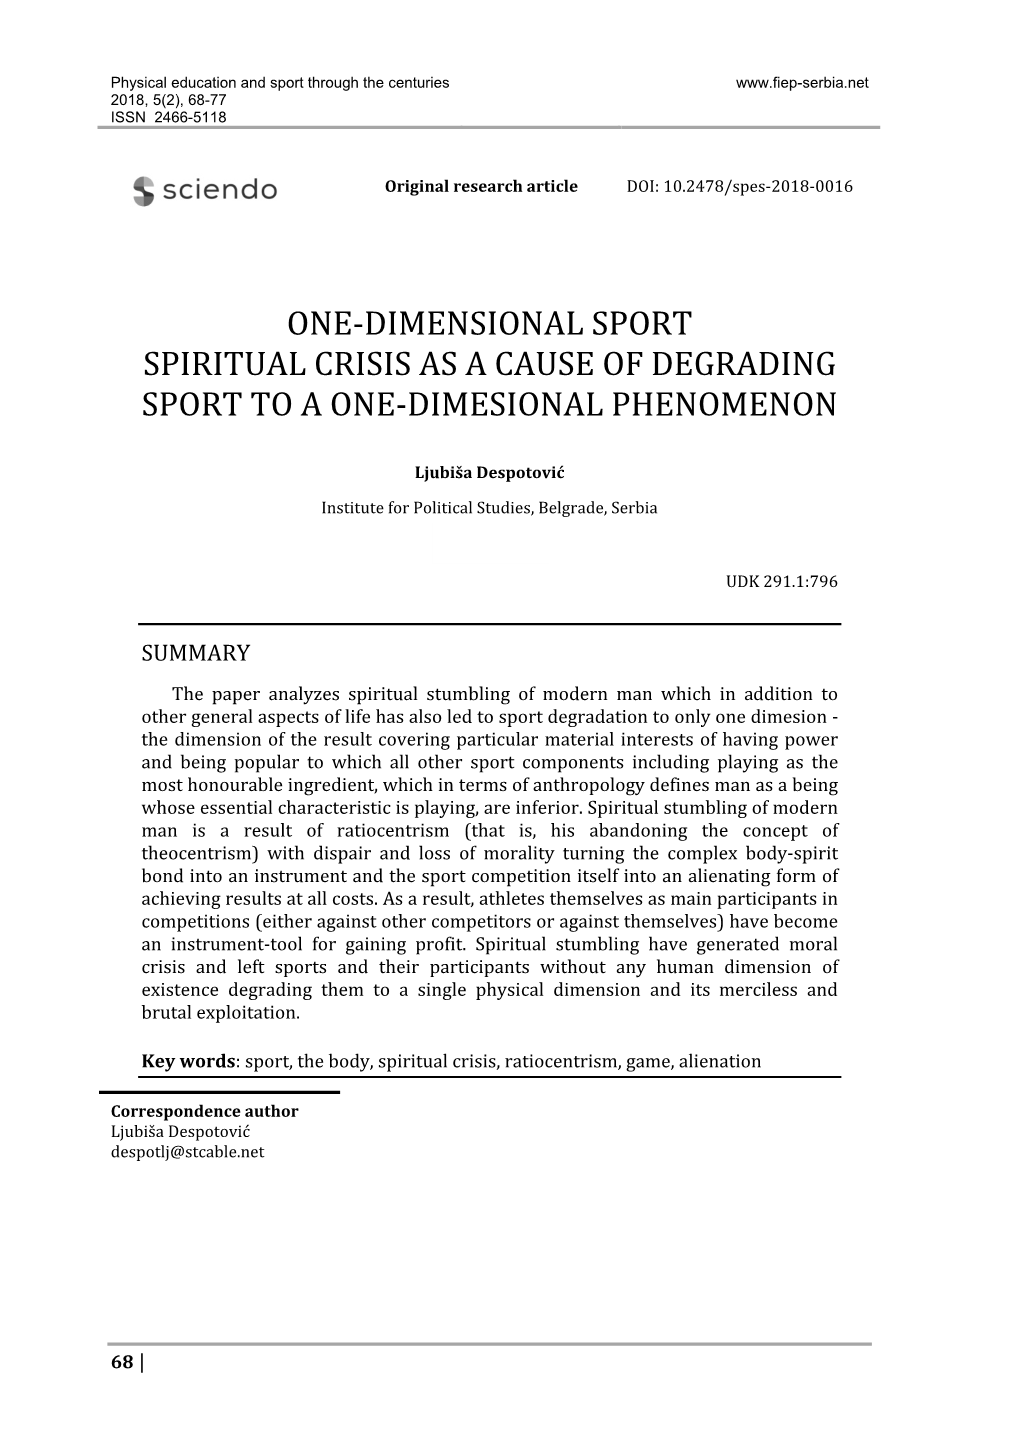 One‐Dimensional Sport Spiritual Crisis As a Cause of Degrading Sport to a One‐Dimesional Phenomenon